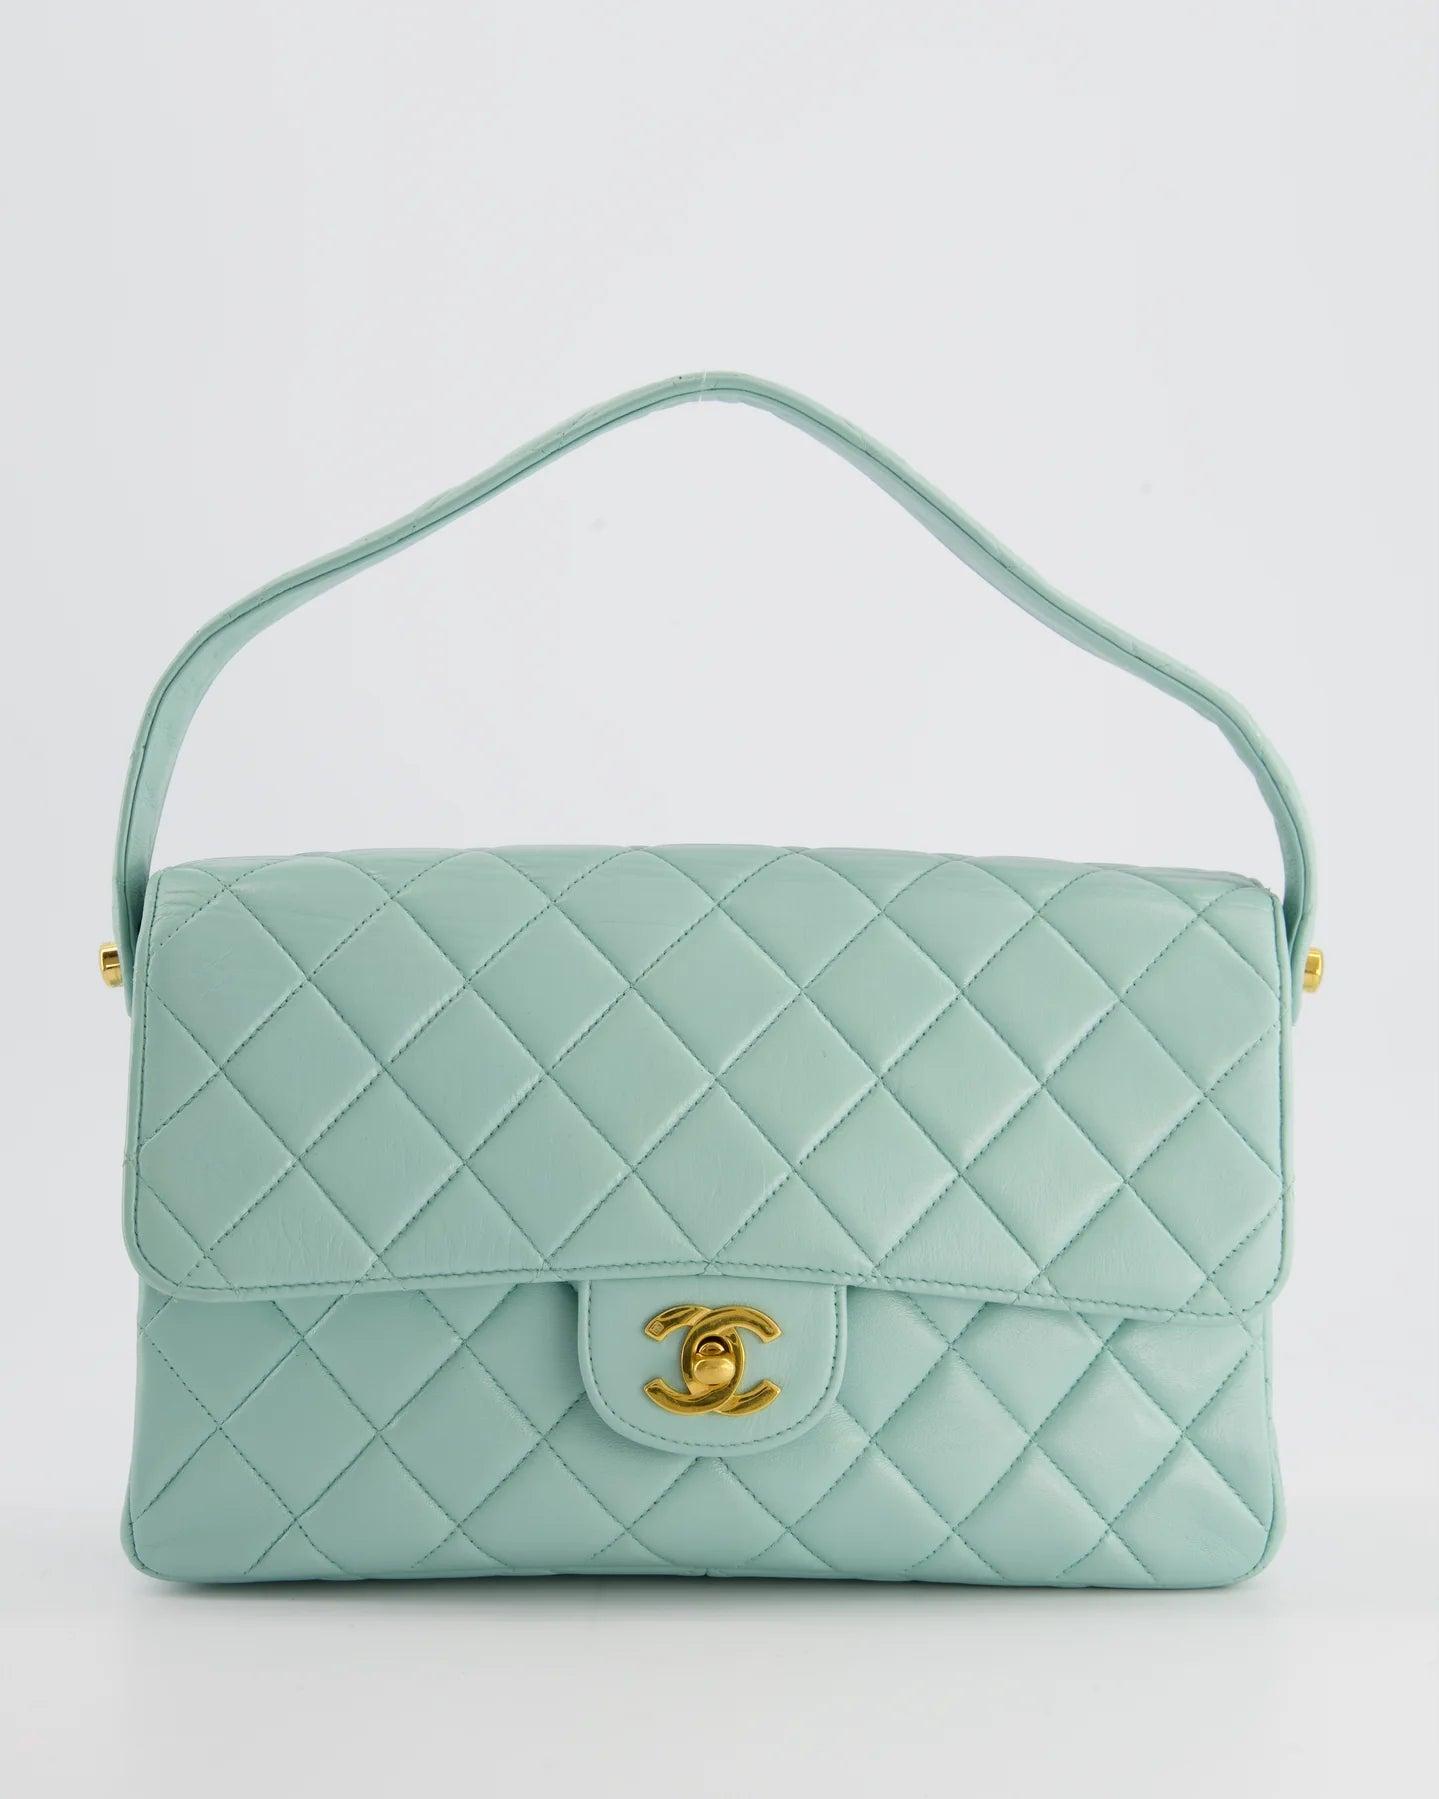 Chanel Vintage Light Blue Double Faced Flap Bag With 24k Gold Hardware